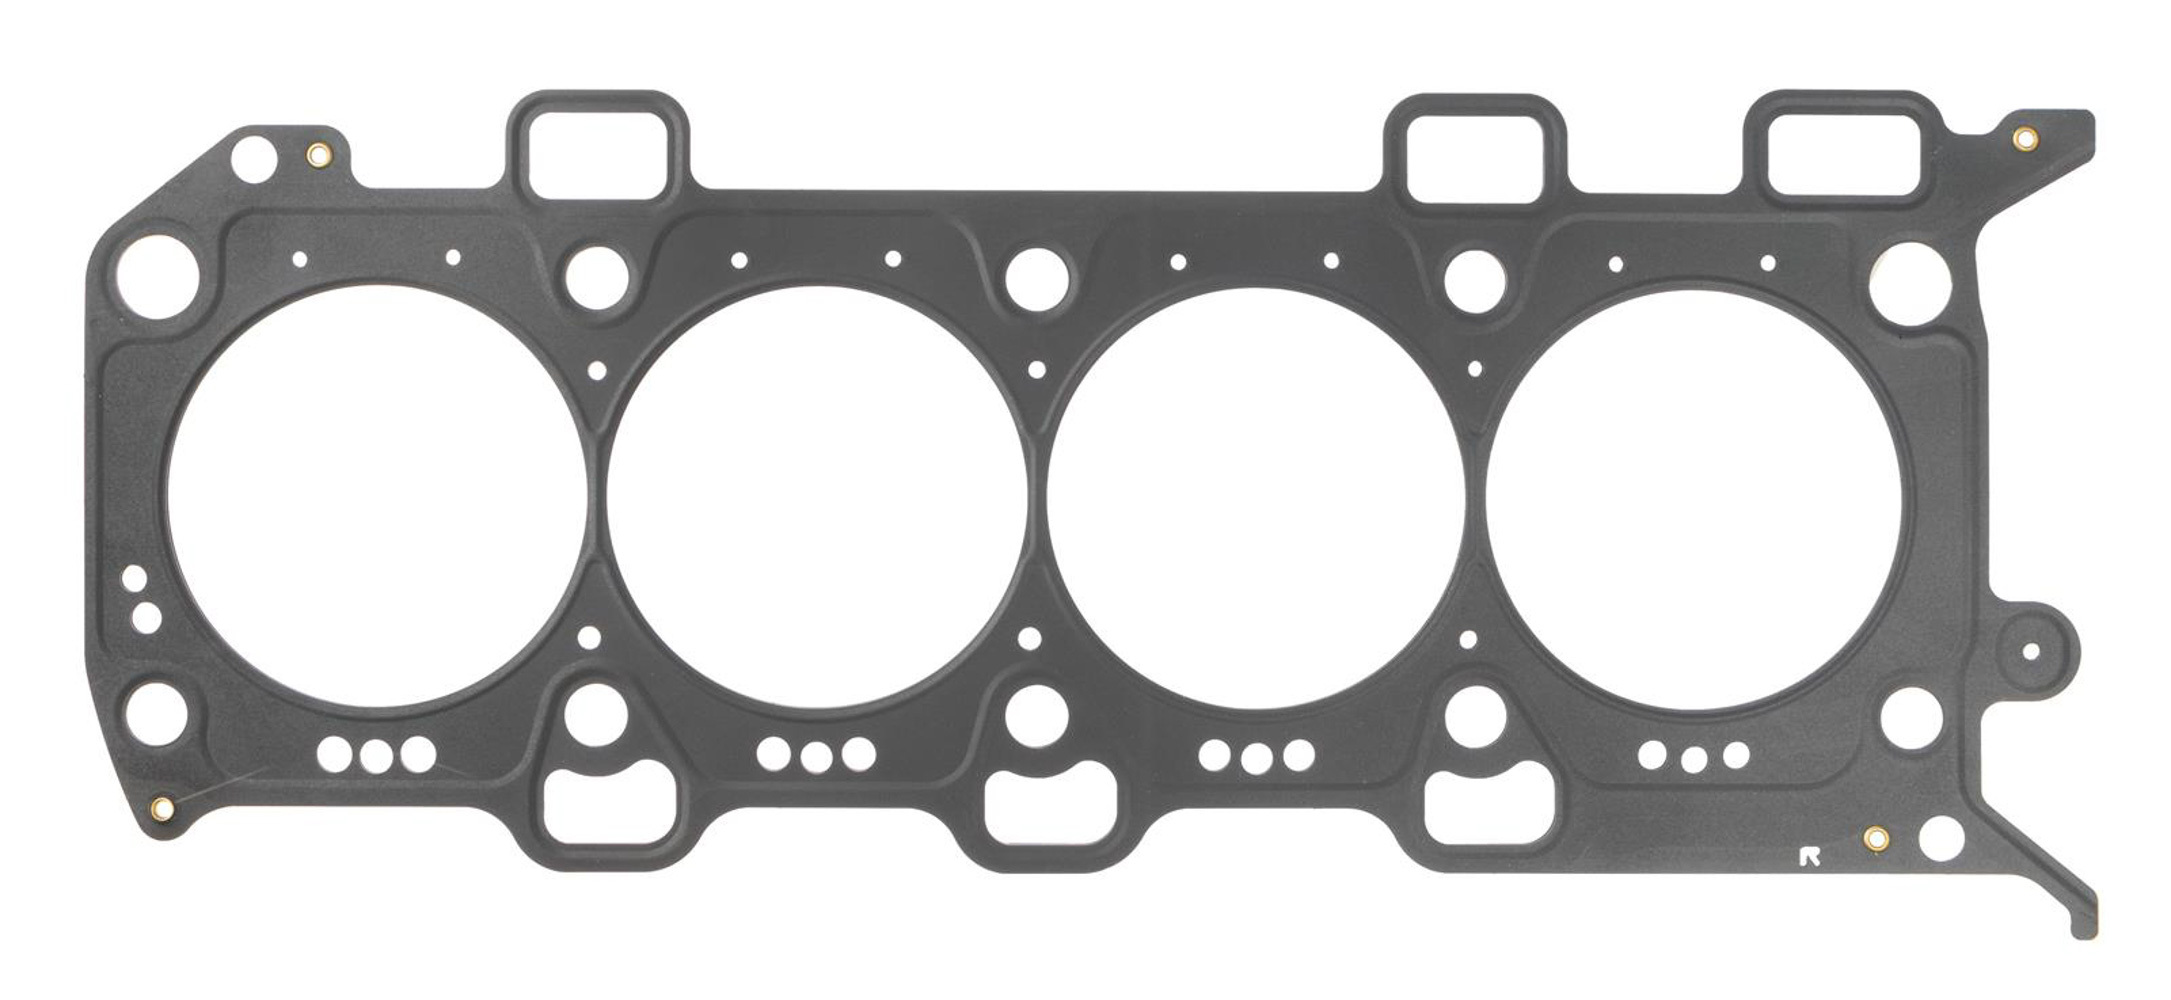 SCE Gaskets M477539V2R - Cylinder Head Gasket, MLS Spartan, 3.756 in Bore, 0.039 in Compression Thickness, Multi-Layer Steel, Passenger Side, Coyote, Ford Modular, Each